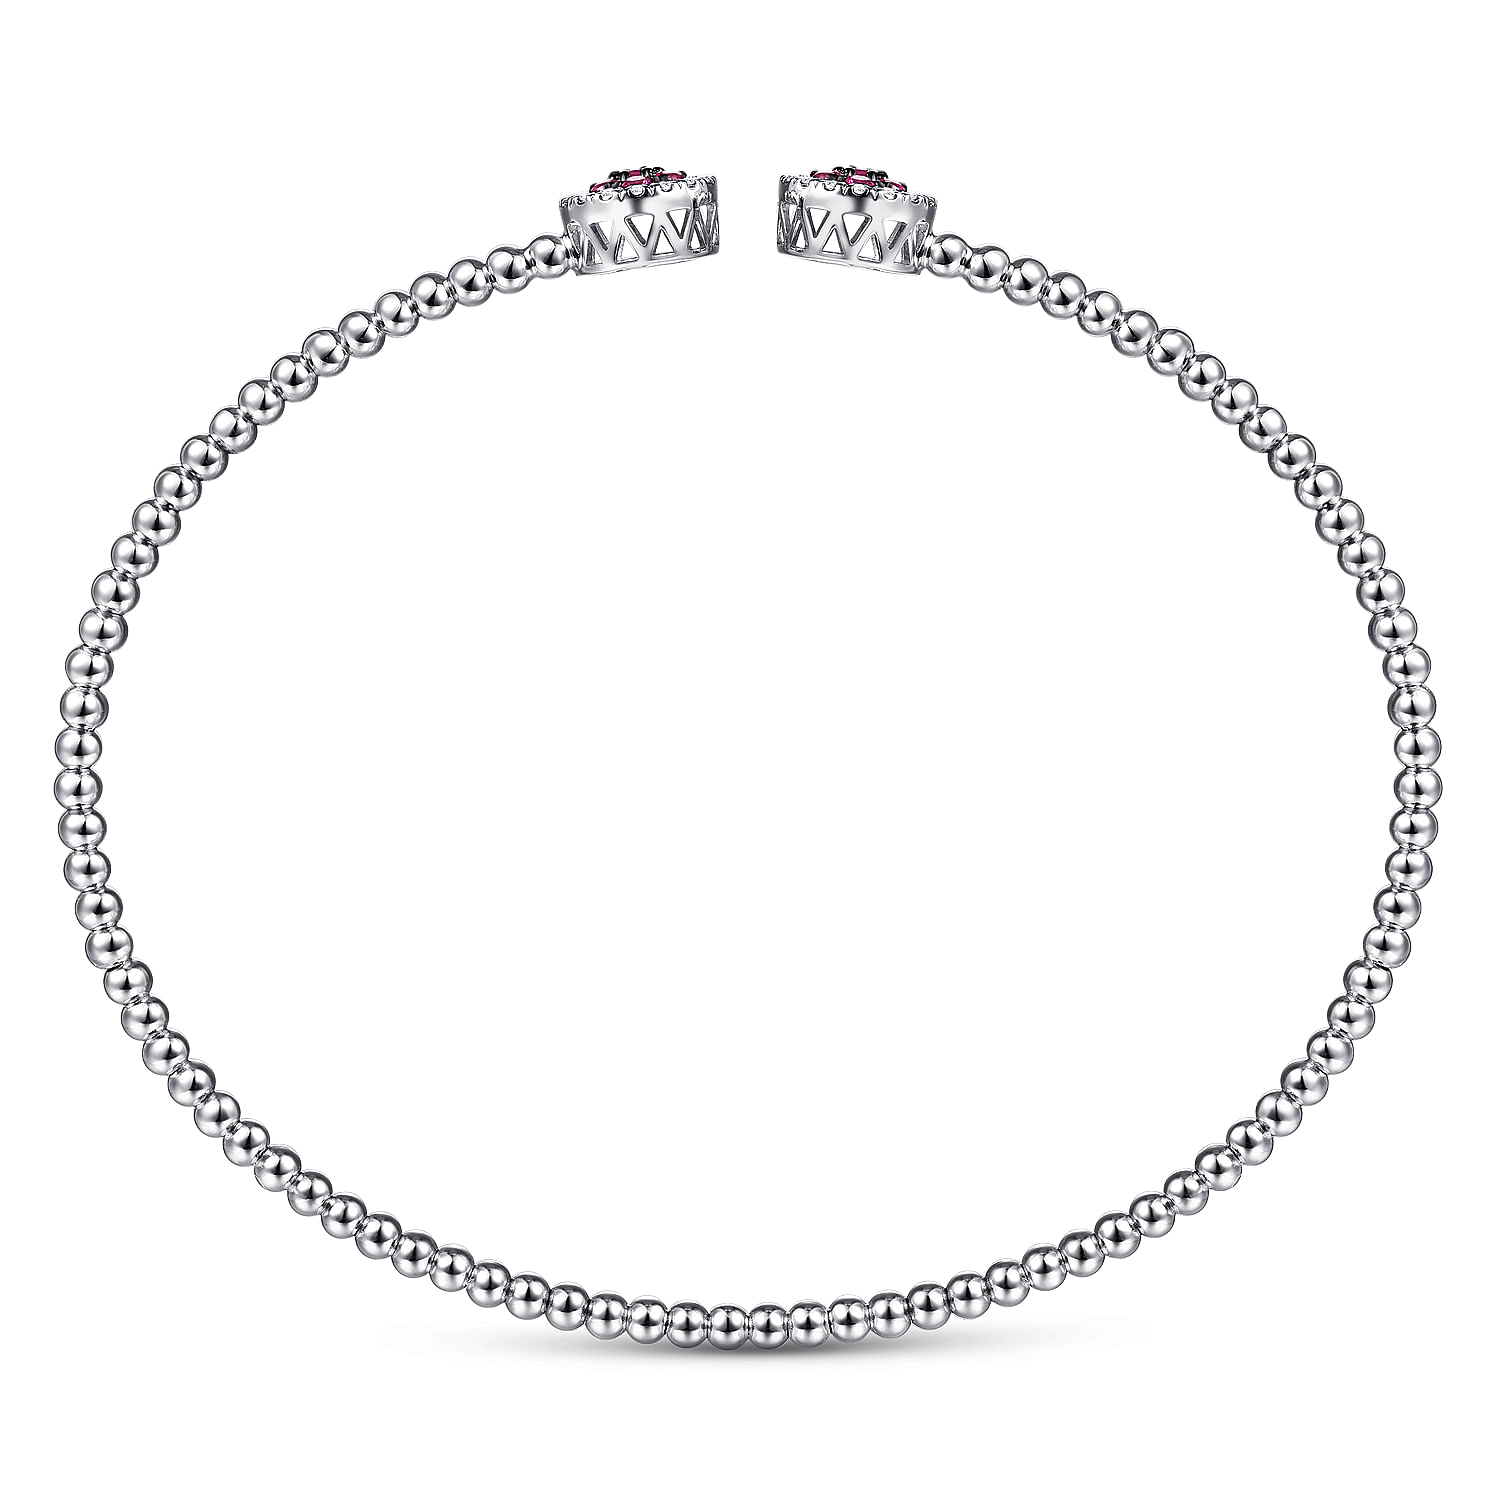 14K White Gold Bujukan Bead Cuff Bracelet with Ruby and Diamond Halo Caps